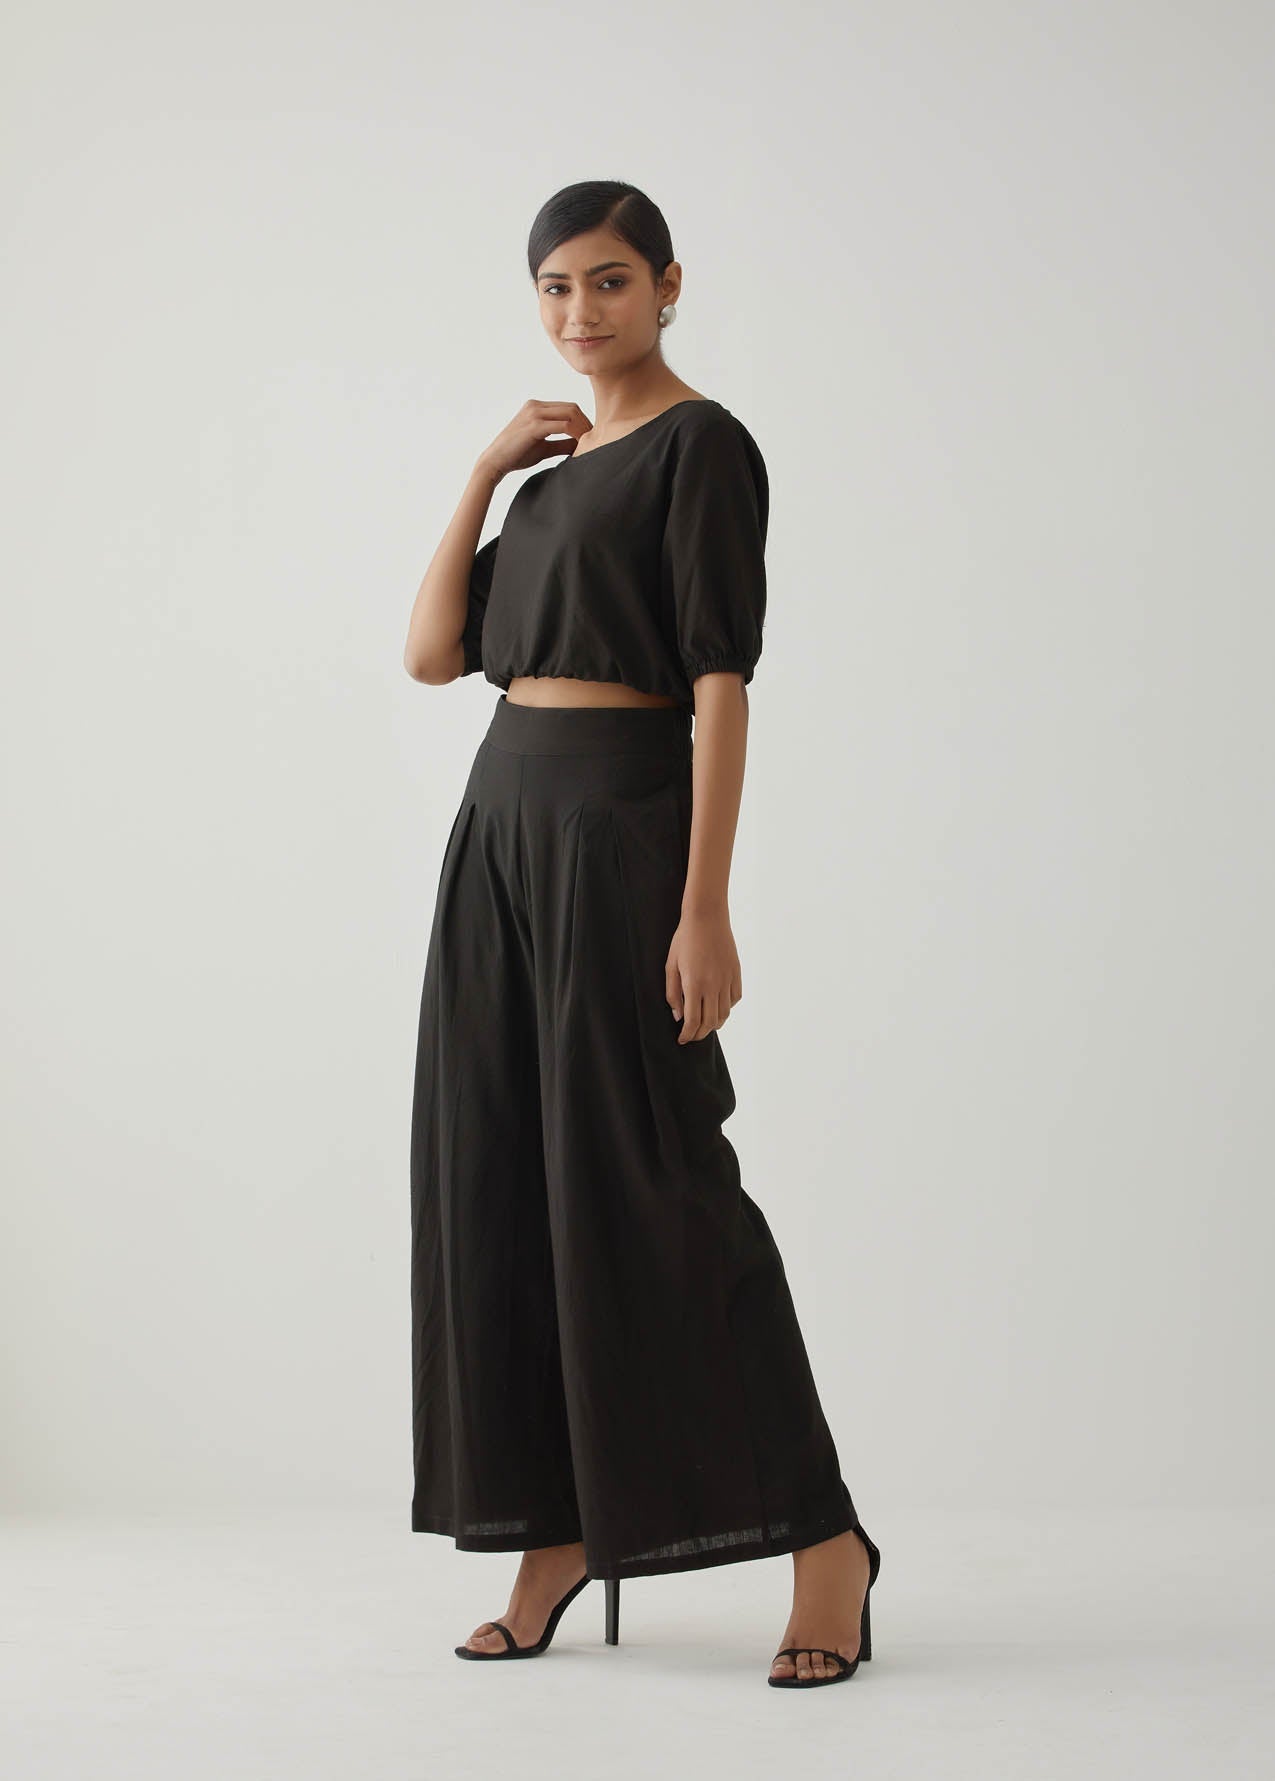 Black Crop Top - The Indian Cause